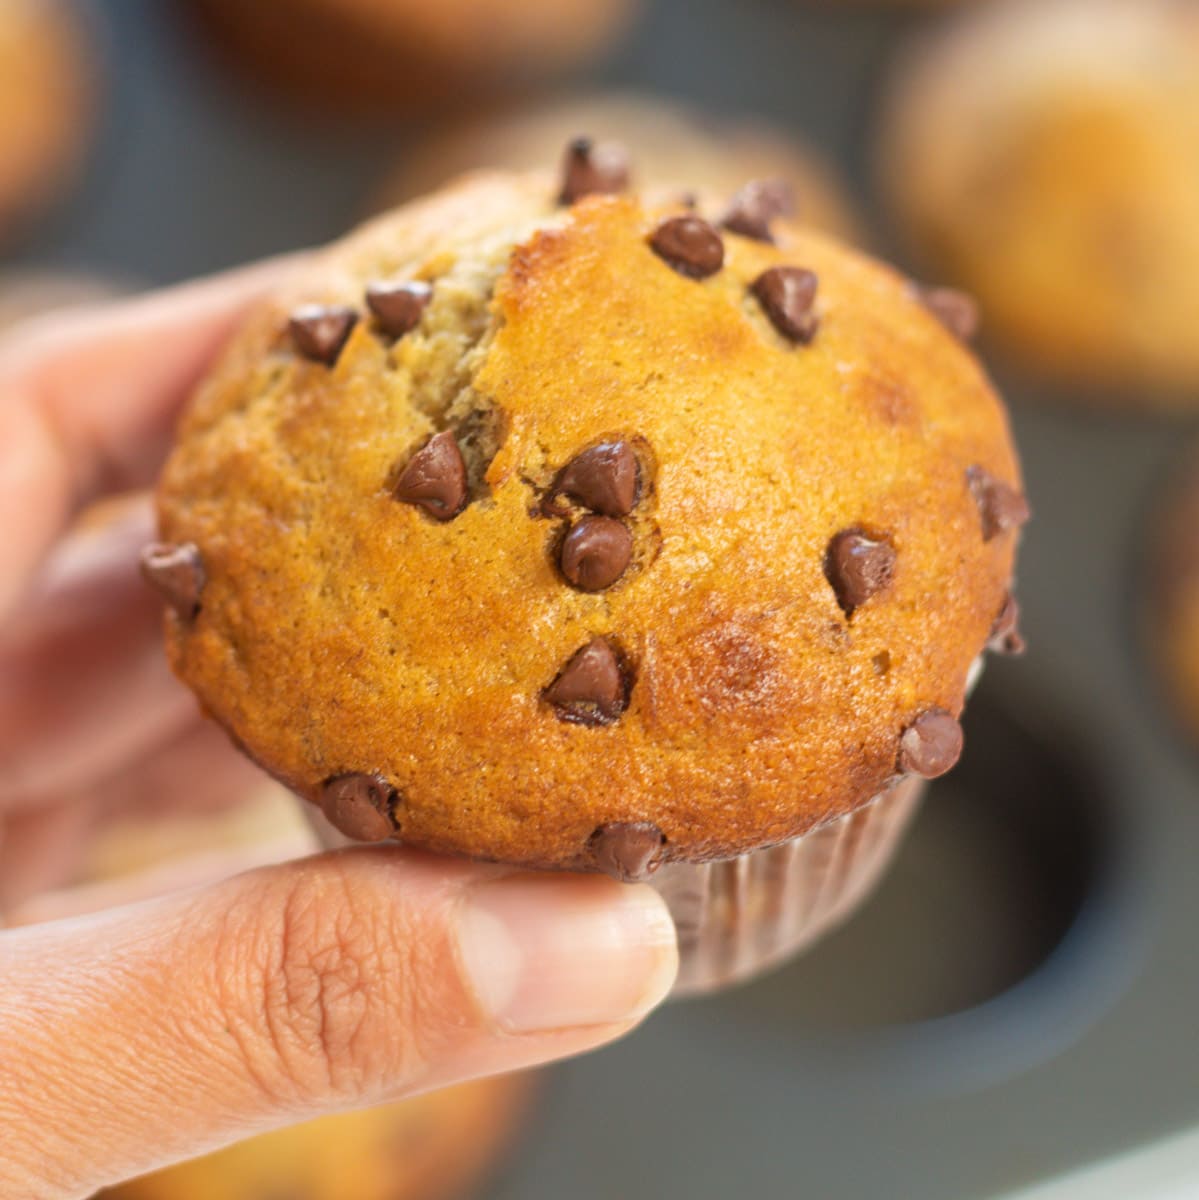 https://pipingpotcurry.com/wp-content/uploads/2022/01/easy-banana-chocolate-chip-muffins-recipe-best-Piping-Pot-Curry.jpg